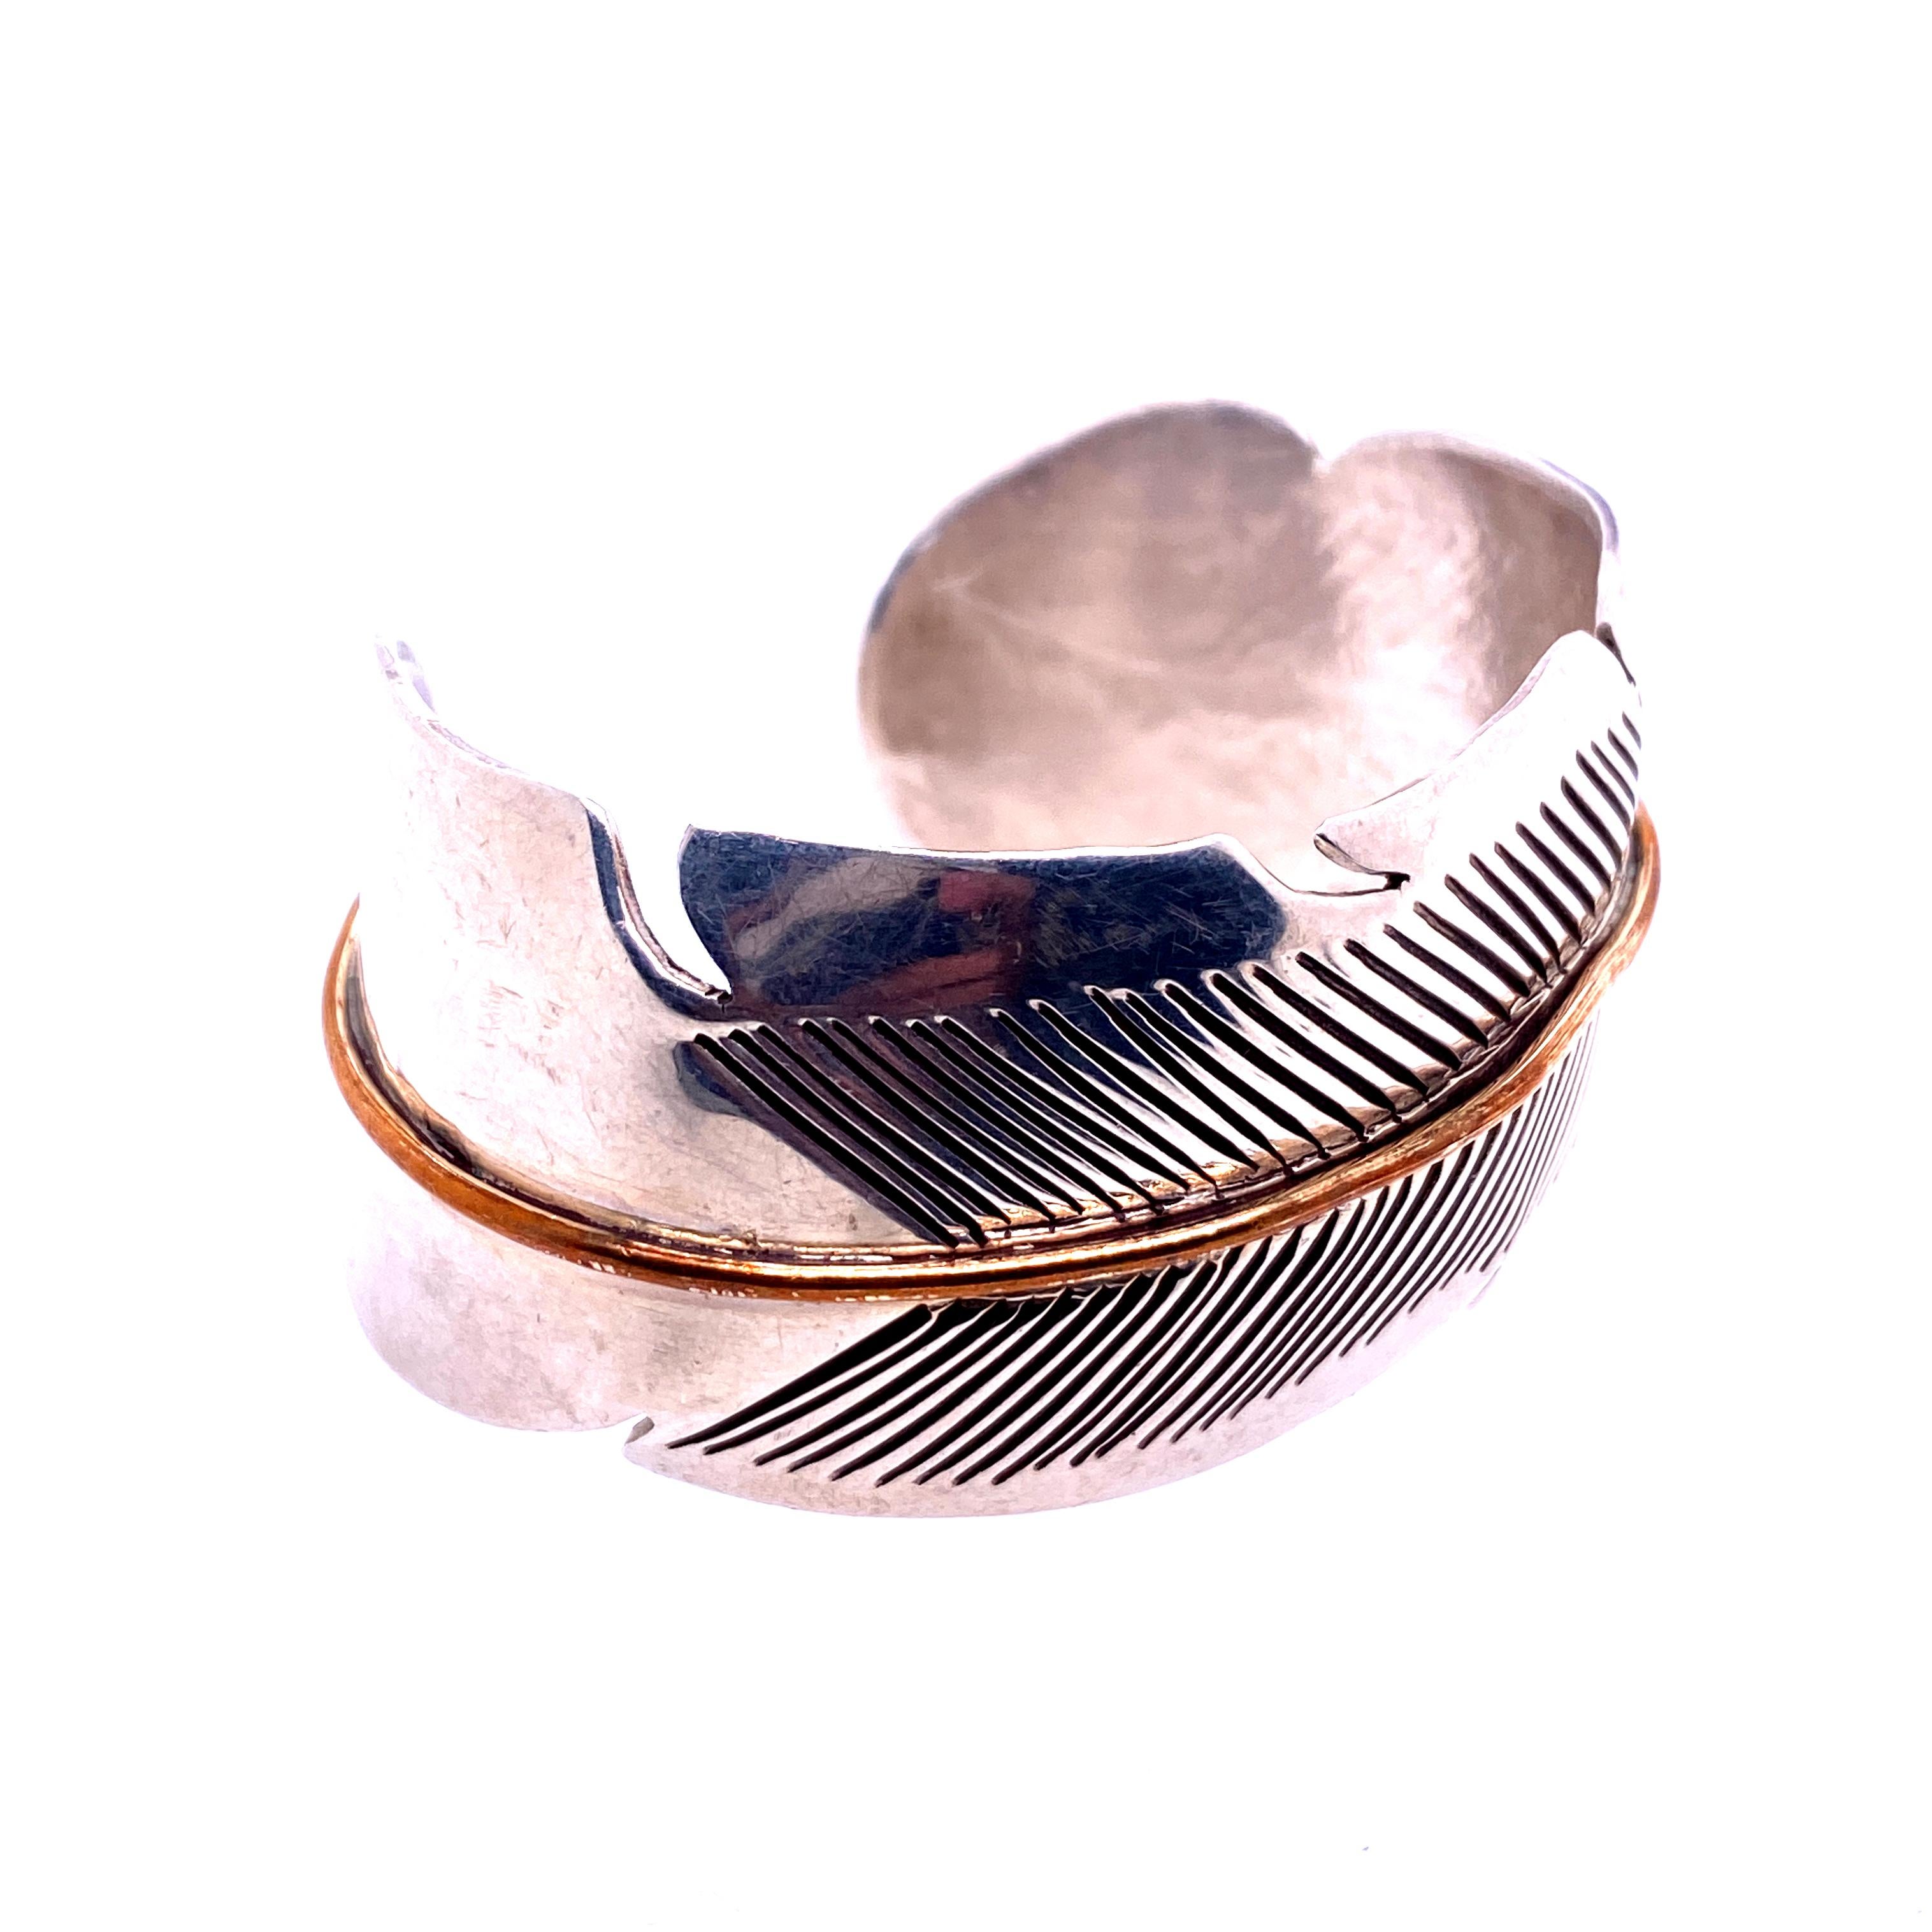 One sterling silver cuff bracelet with a feather engraving and copper line center.  The cuff measures 1.25 inches wide. Circa 1970s